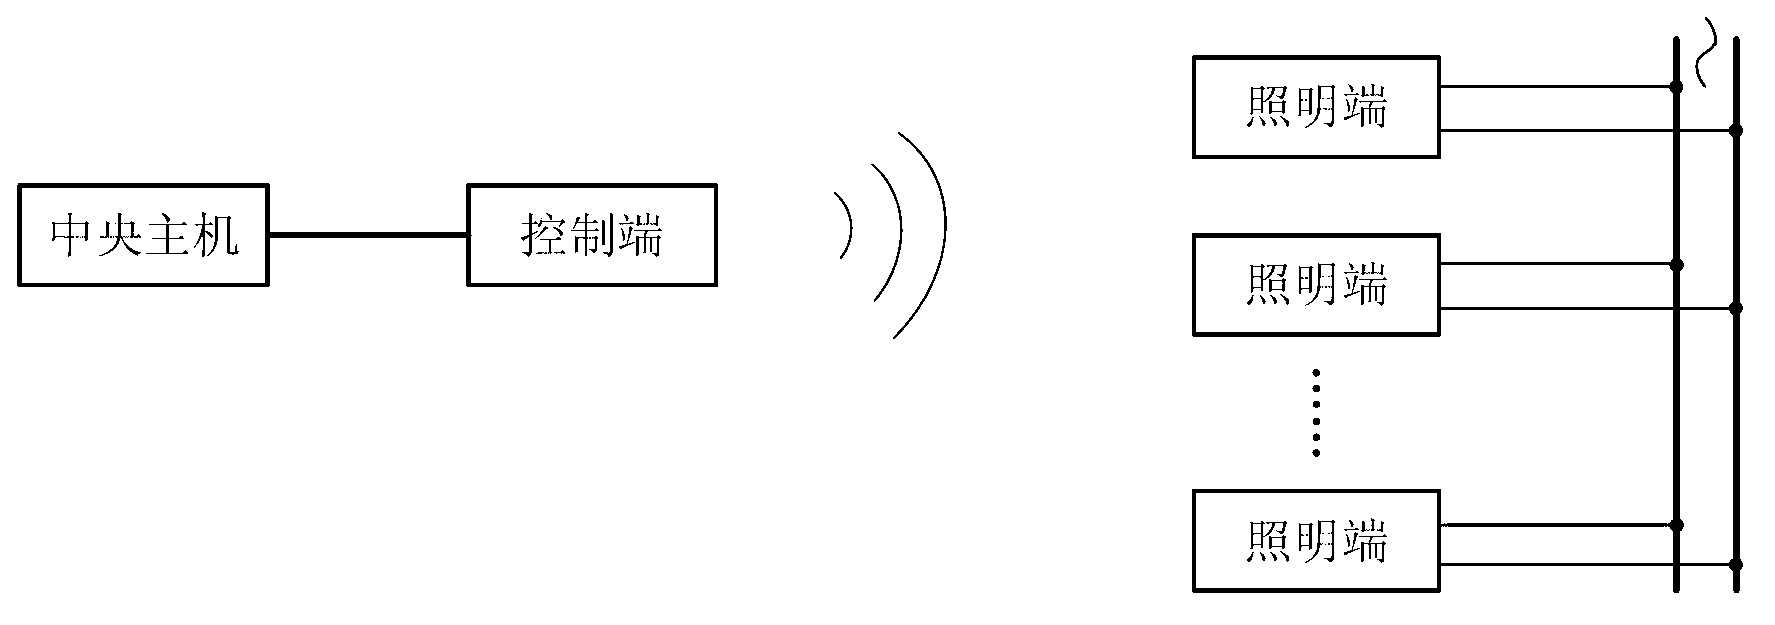 Method for remotely and wirelessly controlling illumination end